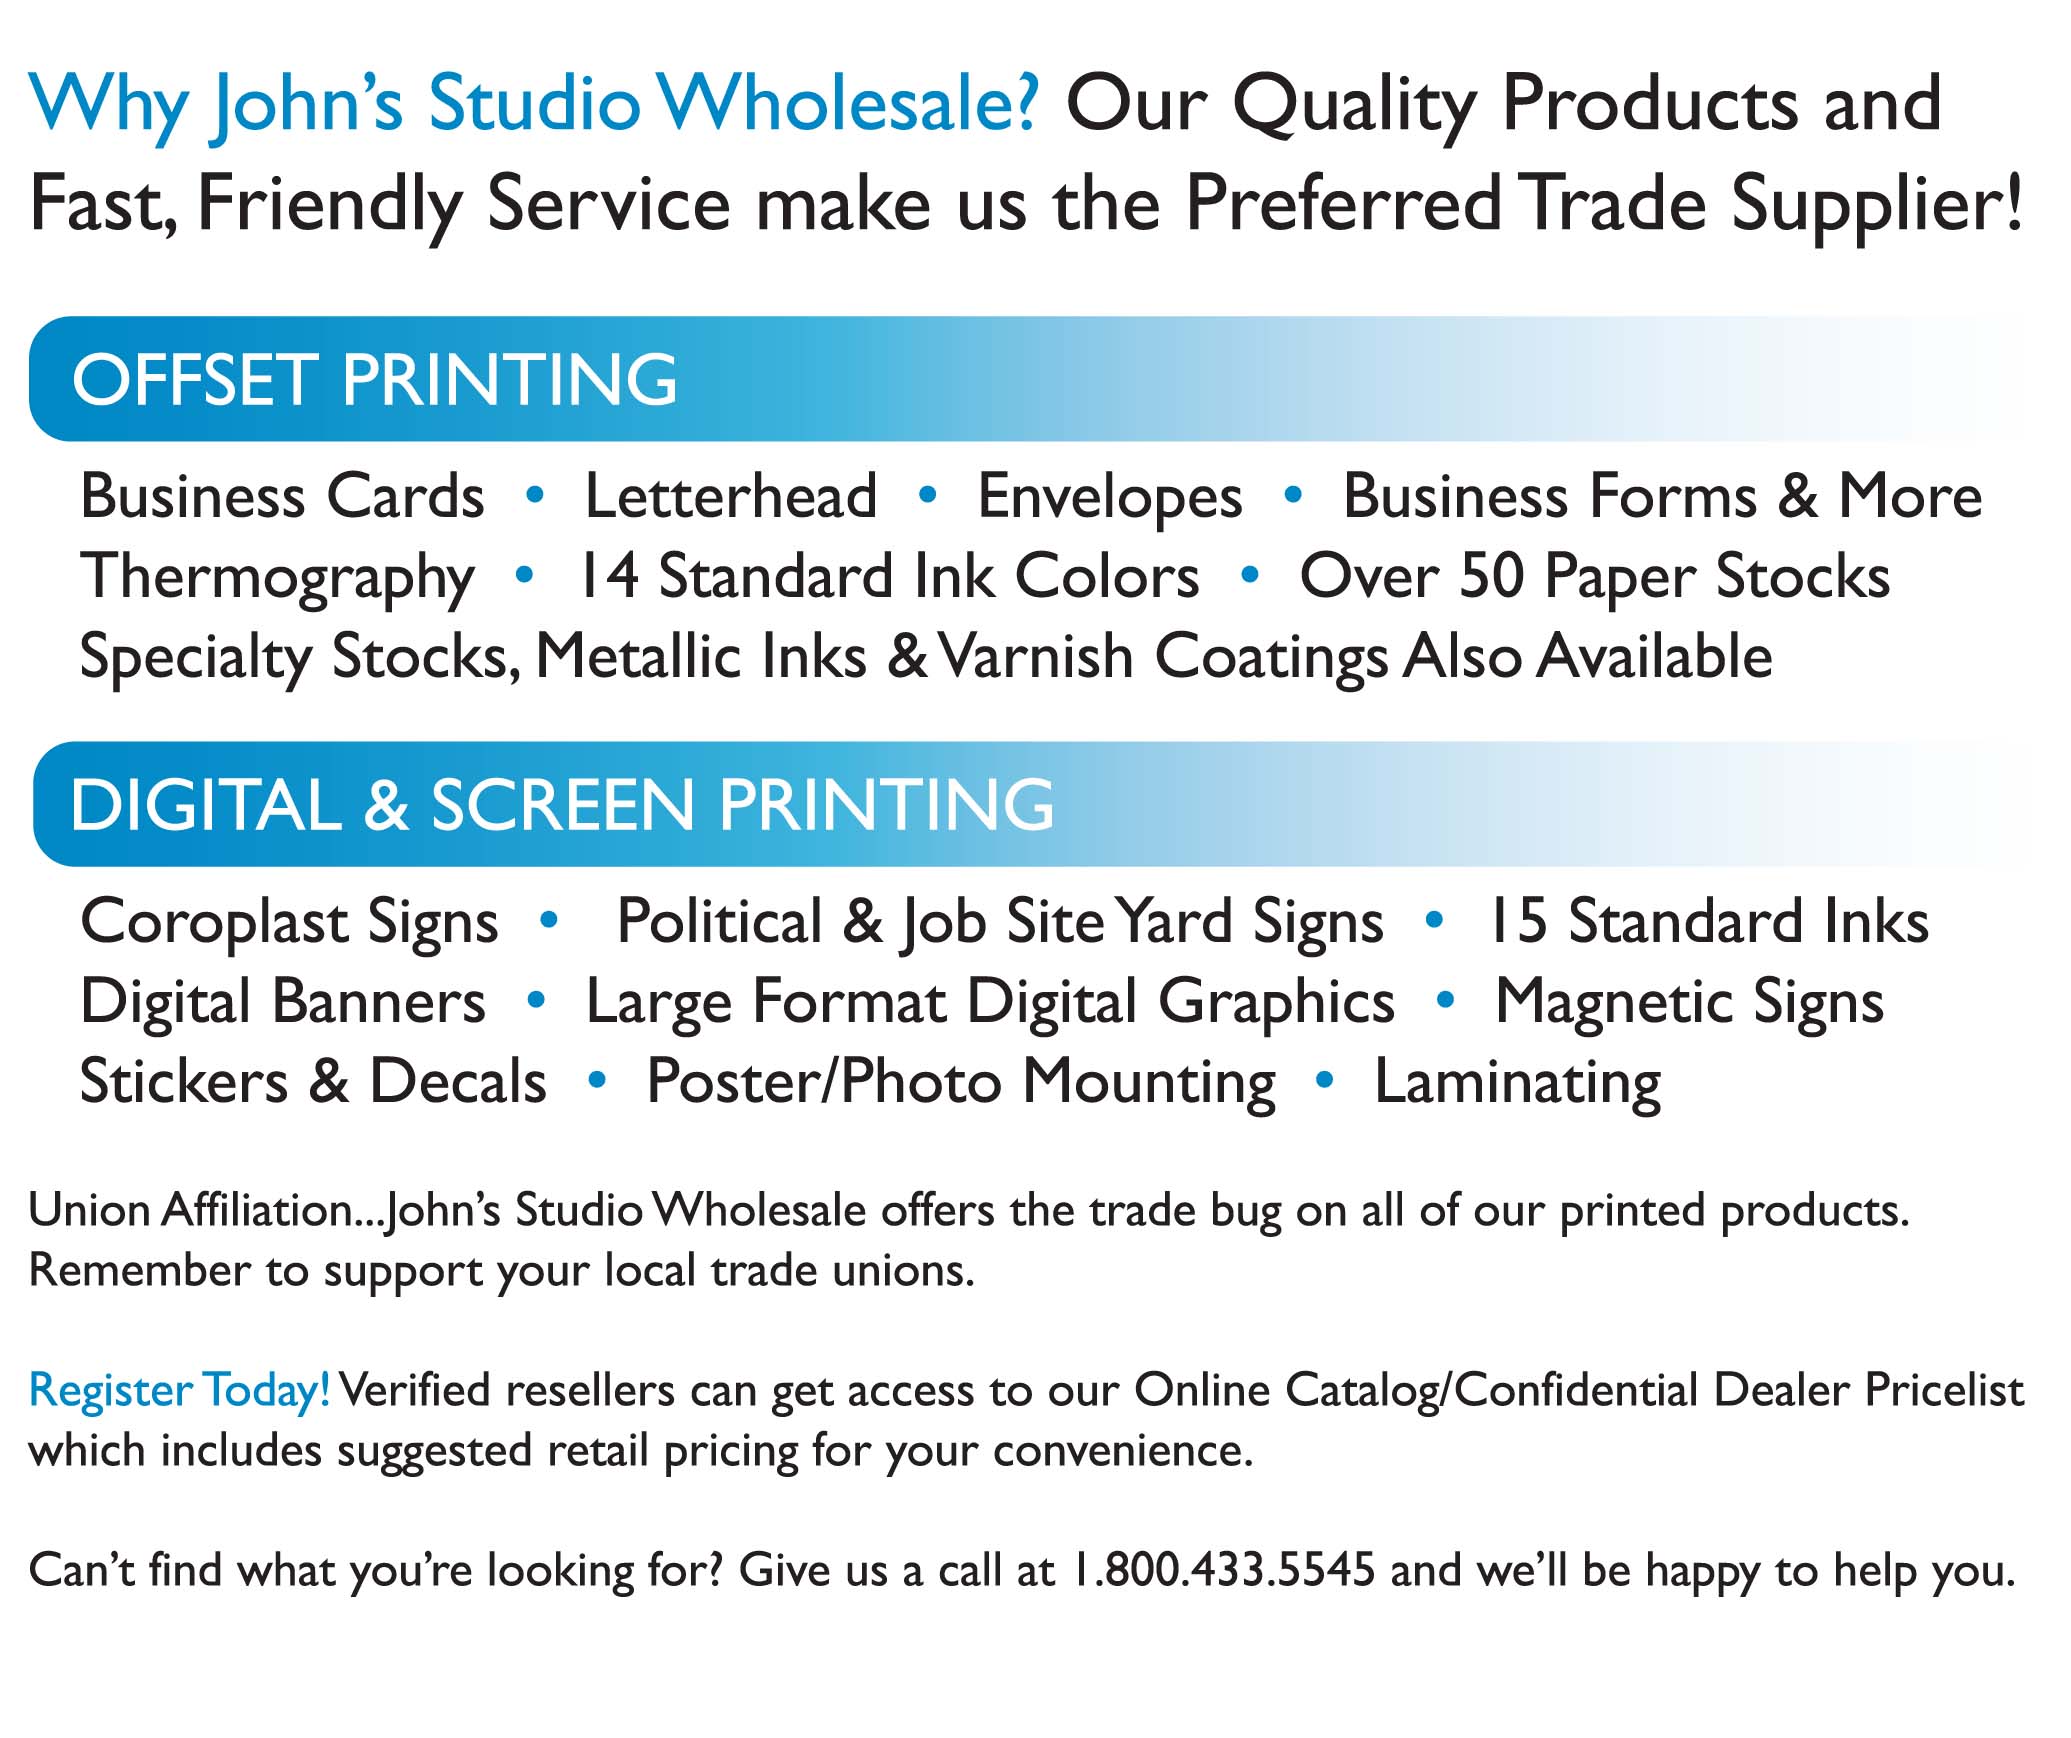 Why John's Studio Wholesale? Our Quality Products and Fast, Friendly Service make us the Preferred Trade Supplier! OFFSET PRINTING  Business Cards • Letterhead • Envelopes • Business Forms & More Thermography • 14 Standard Ink Colors • Over 50 Paper Stocks Specialty Stocks, Metallic Inks & Varnish Coatings Also Available DIGITAL & SCREEN PRINTING Coroplast Signs • Political & Job Site Yard Signs • 15 Standard Inks Digital Banners • Large Format Digital Graphics • Magnetic Signs Stickers & Decals • Poster/Photo Mounting • Laminating Union Affiliation ... John's Studio Wholesale offers the trade bug on all of our printed products. Remember to support your local trade unions. Register Today! Verified resellers can get access to our Online Catalog/Confidential Dealer Pricelist which includes suggested retail pricing for your convenience. Can't find what you're looking for? Give us a call at (585) 345-1030 and we'll be happy to help you.